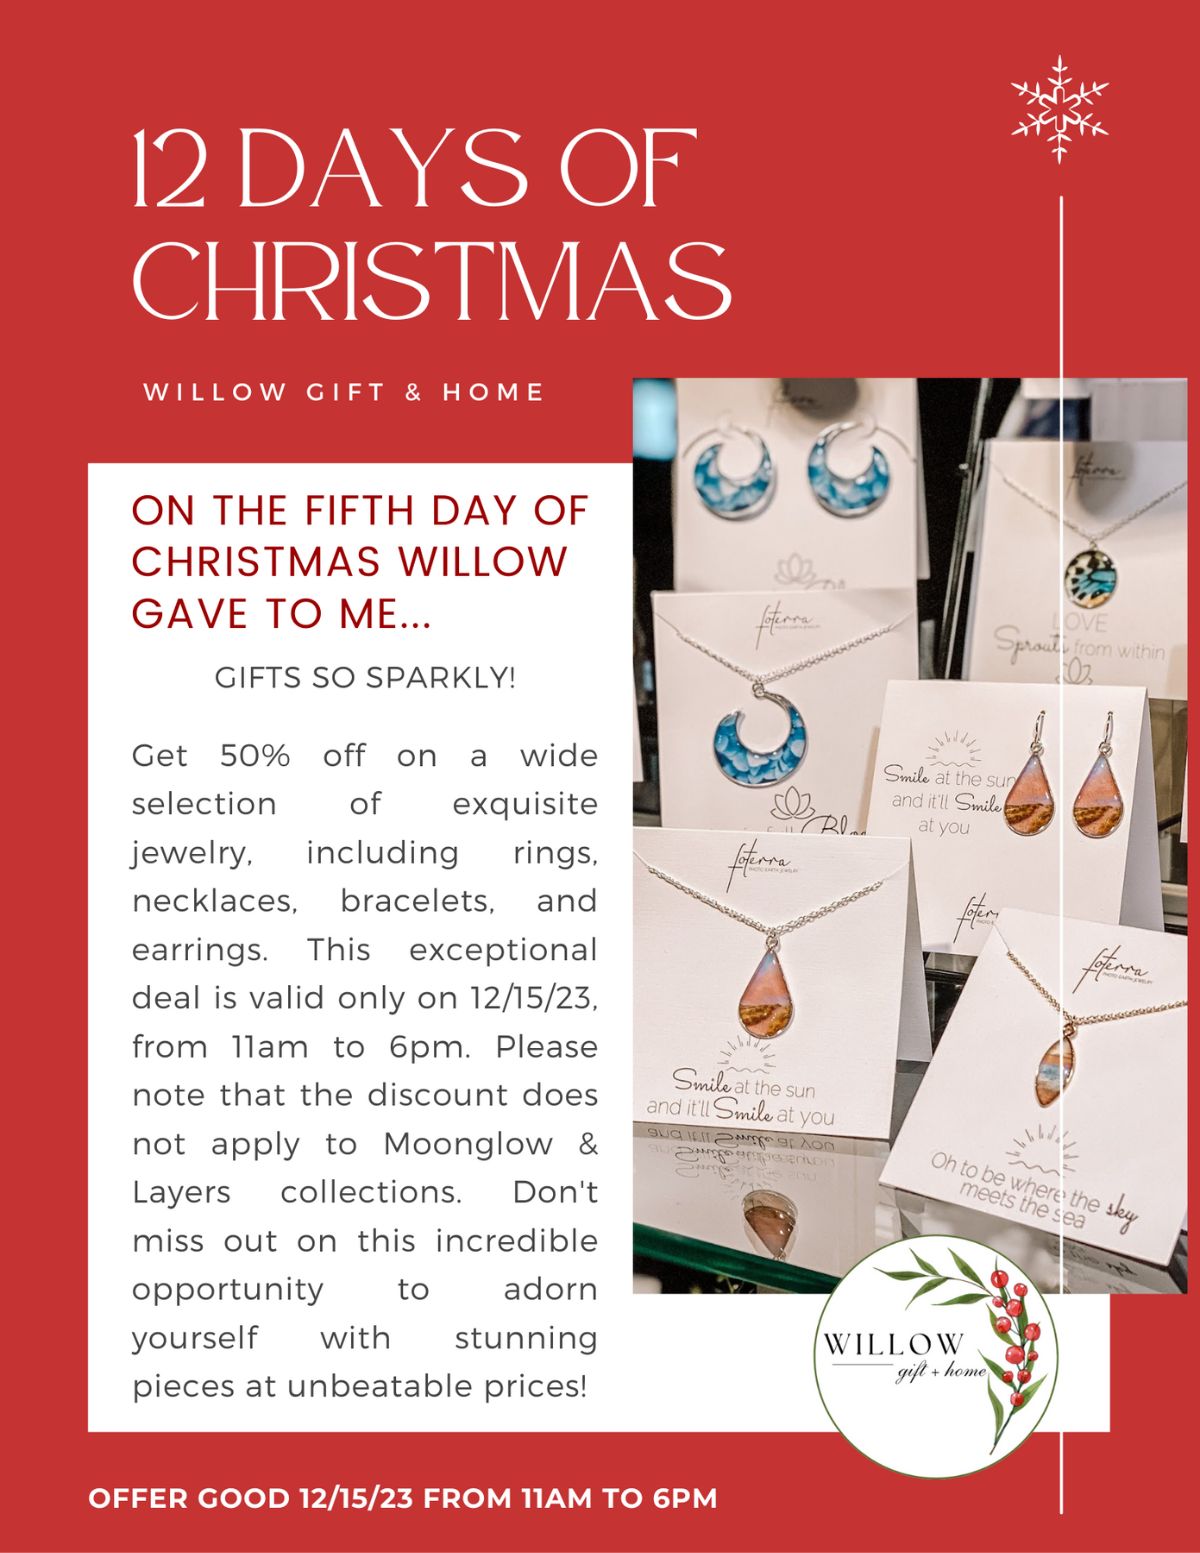 On the fifth day of christmas Willow gave to me ...